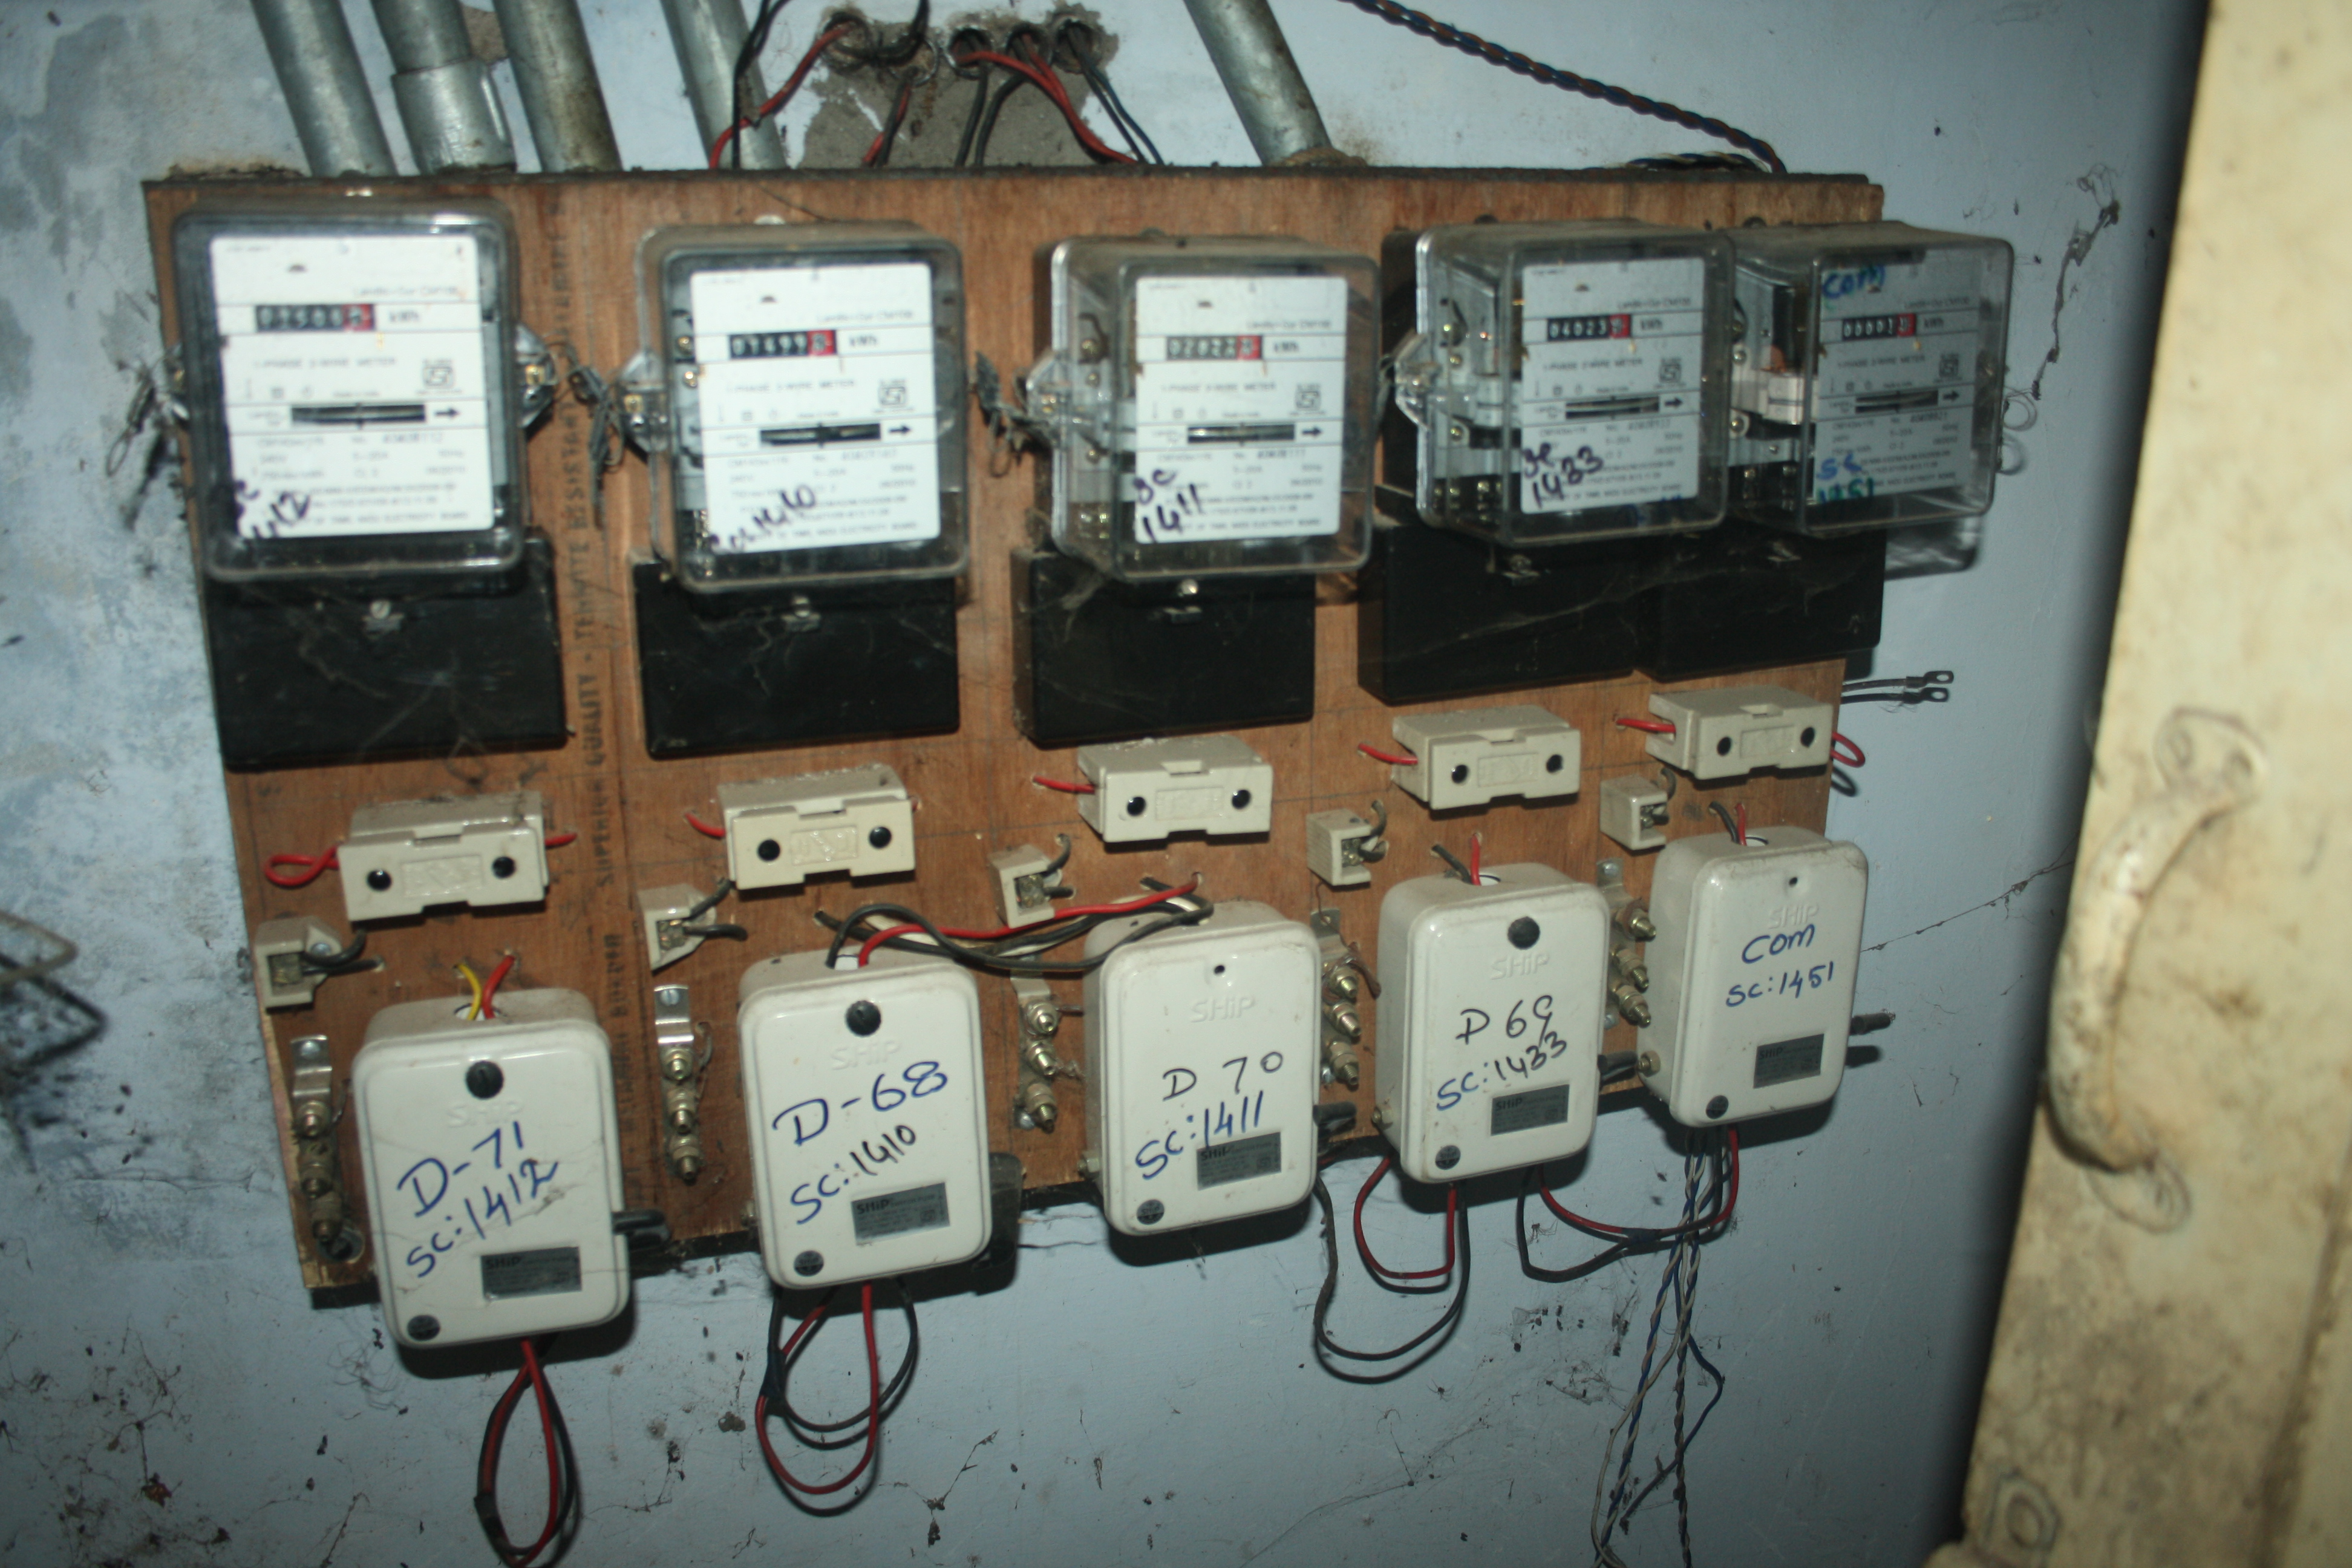 Electricity meters in India. For representational purposes only. (Source: Wikimedia Commons) 